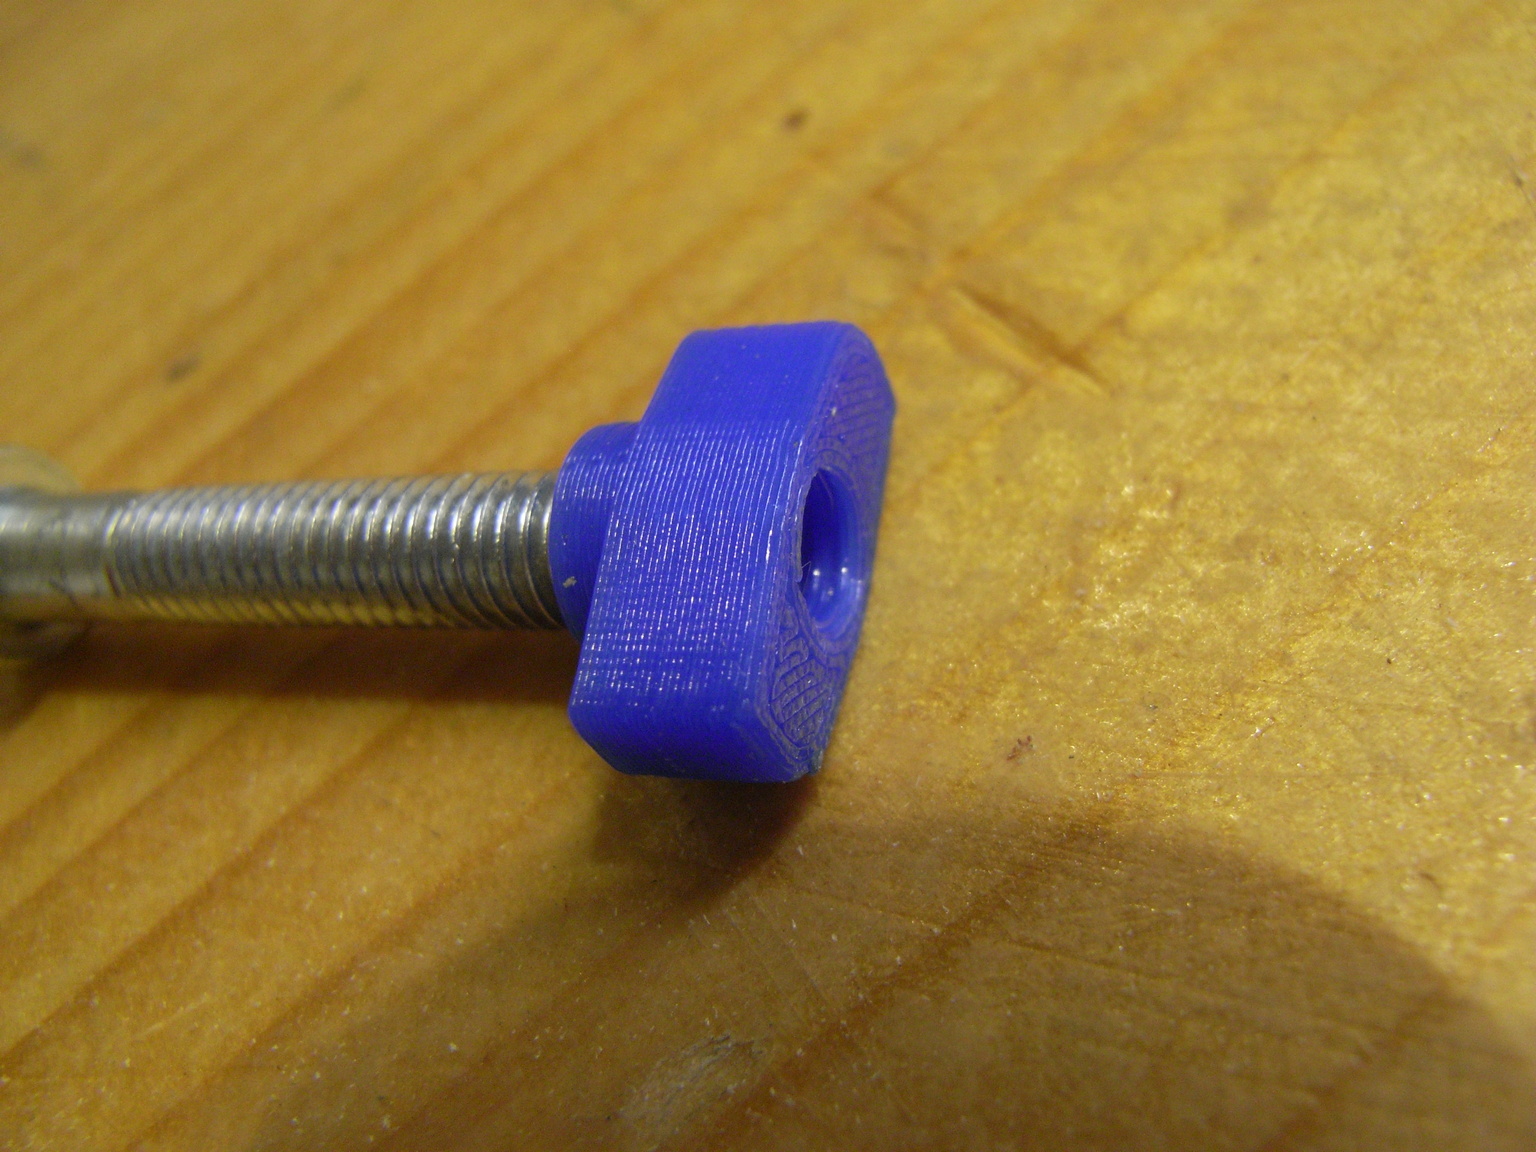 T-Nut for Prusa i3, M3, M4, M5